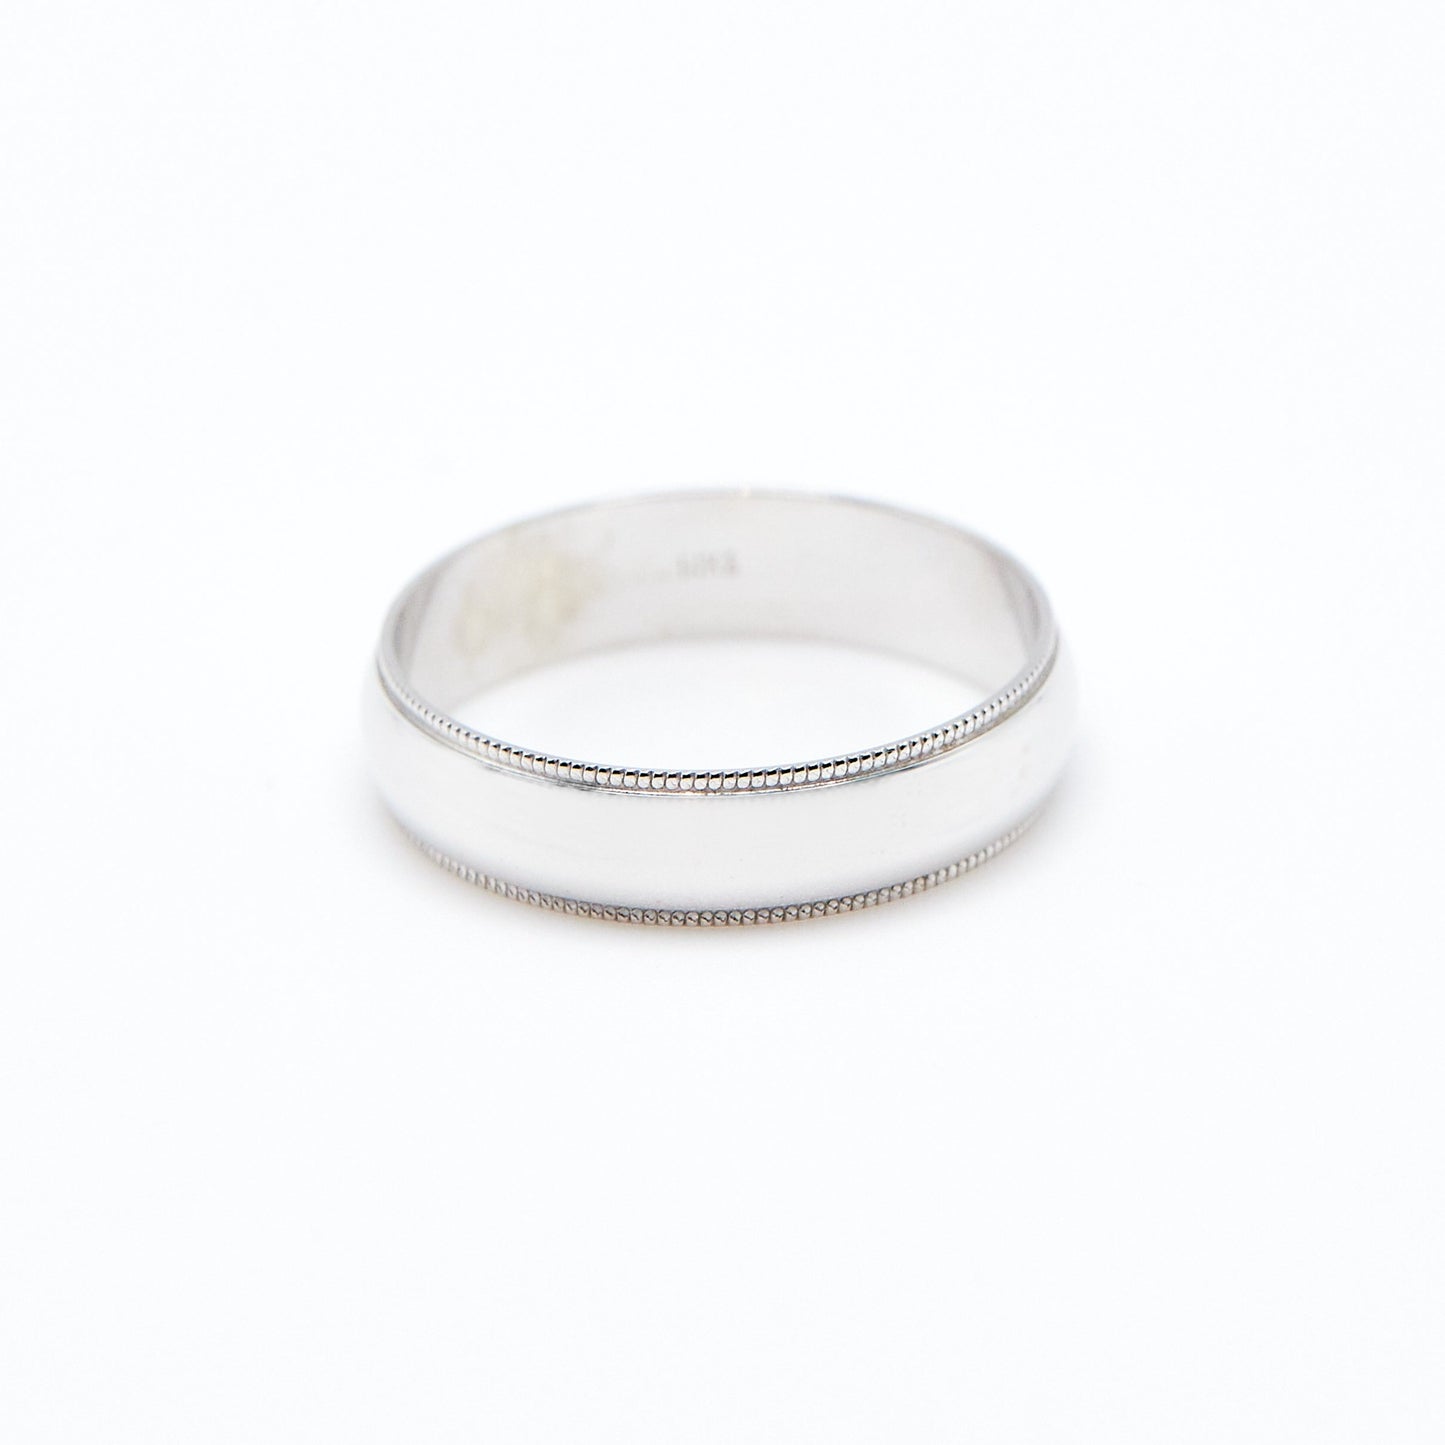 Load image into Gallery viewer, white gold 5mm half round wedding band with milgrain details on white background
